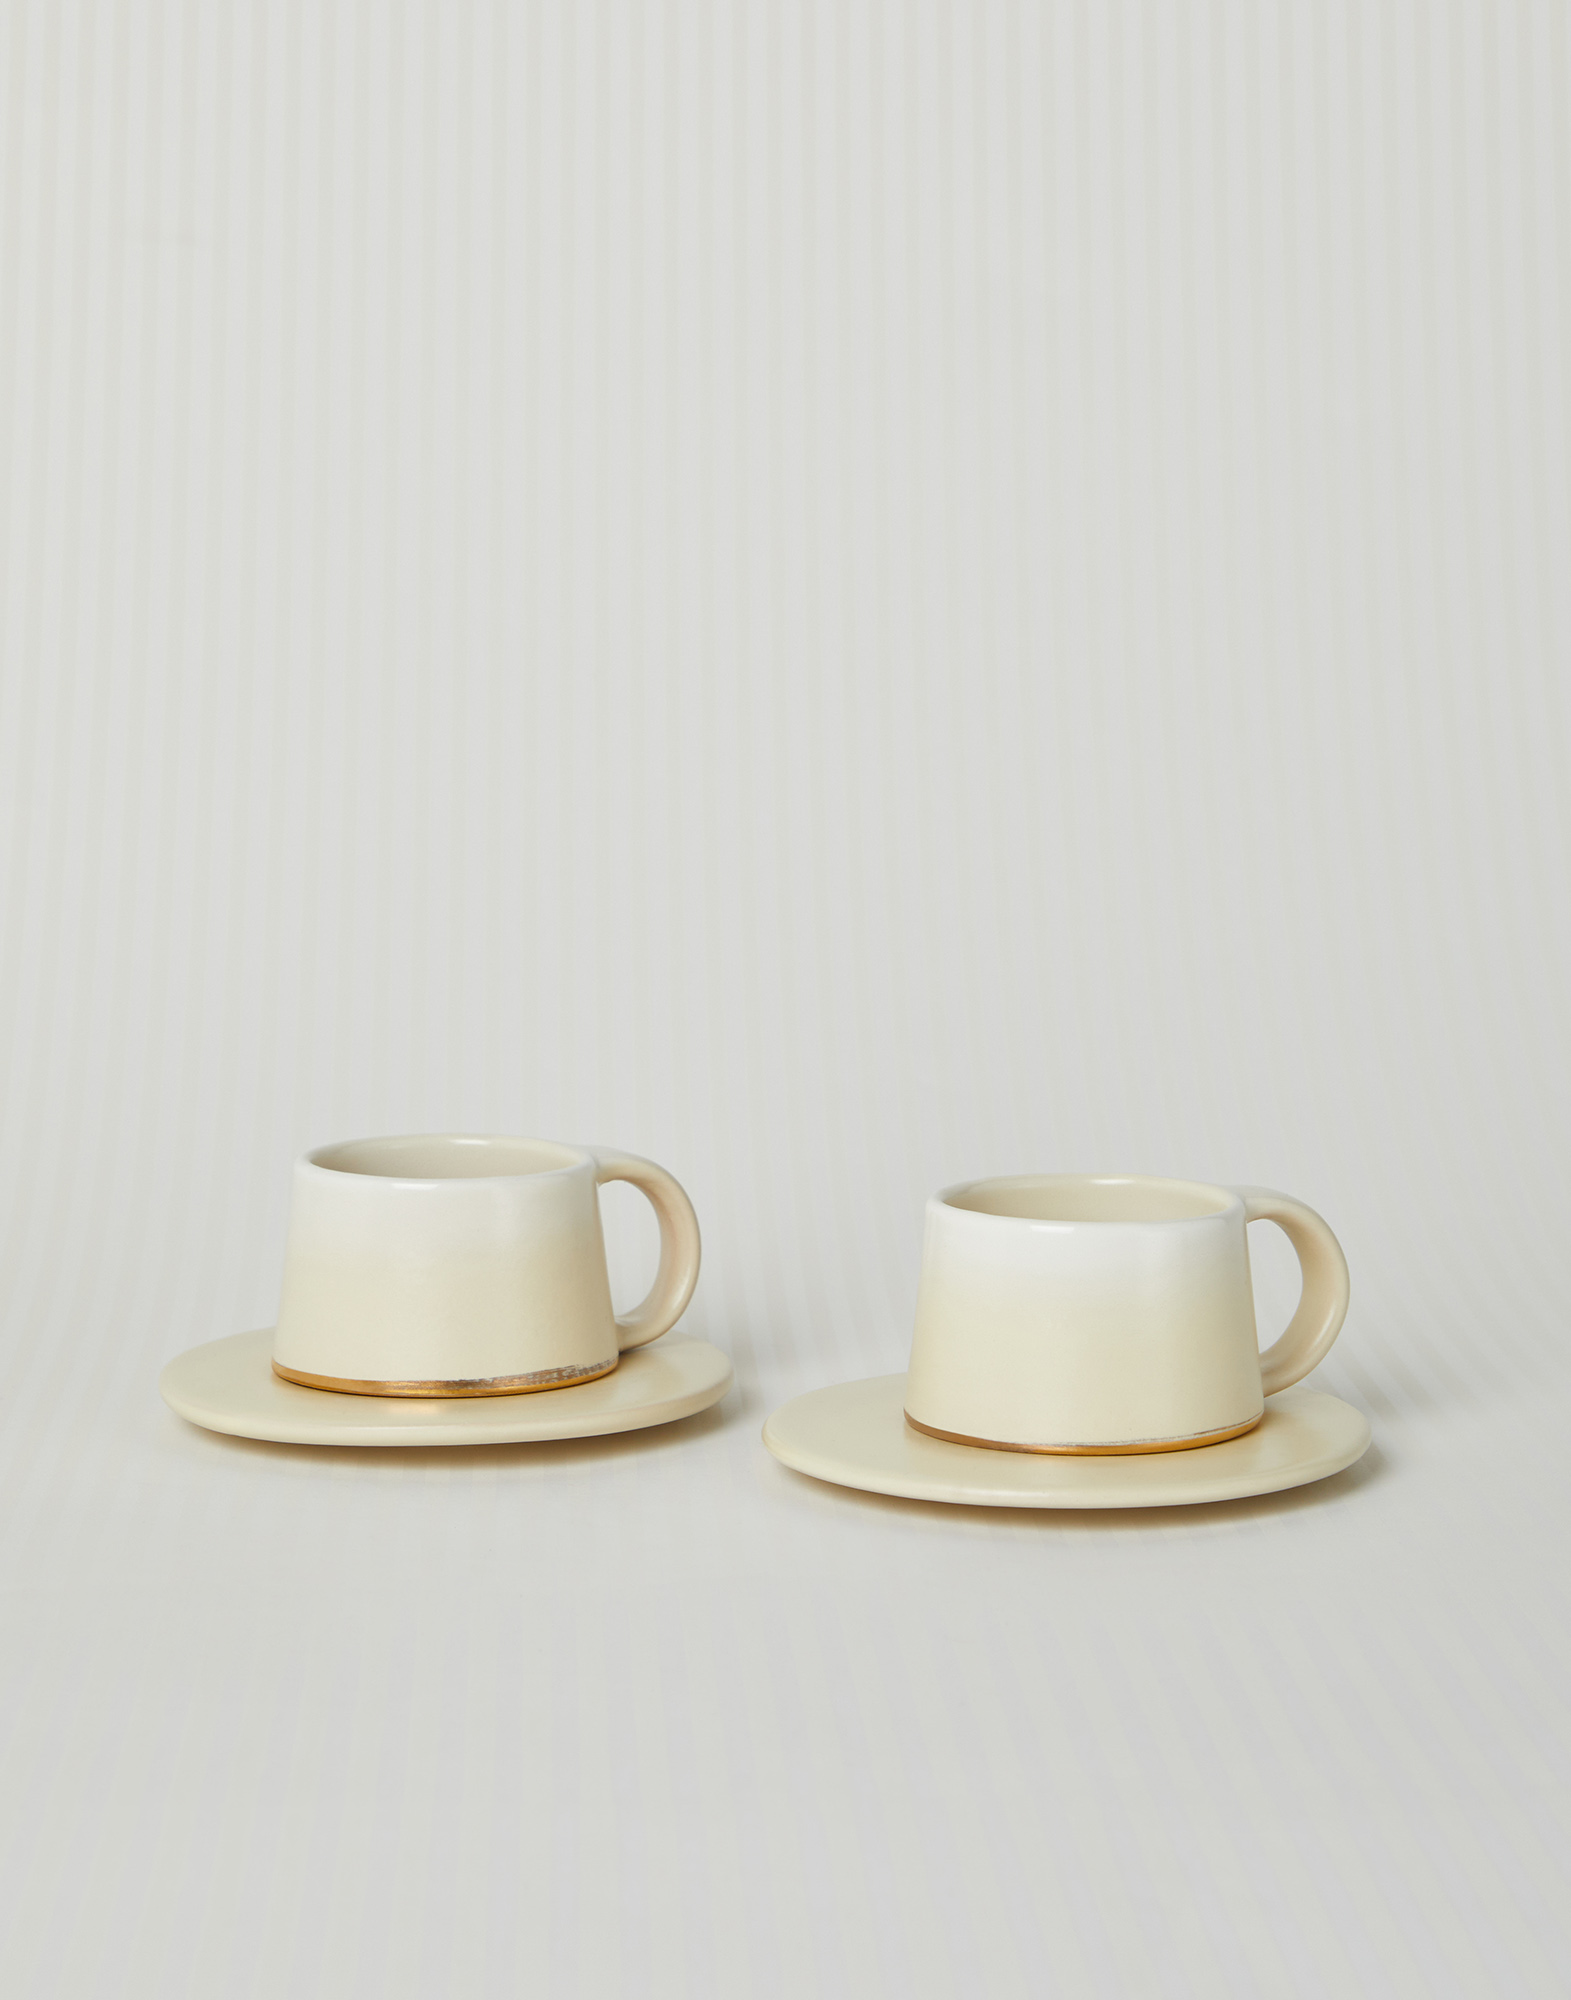 "Winter in White" coffee cup set